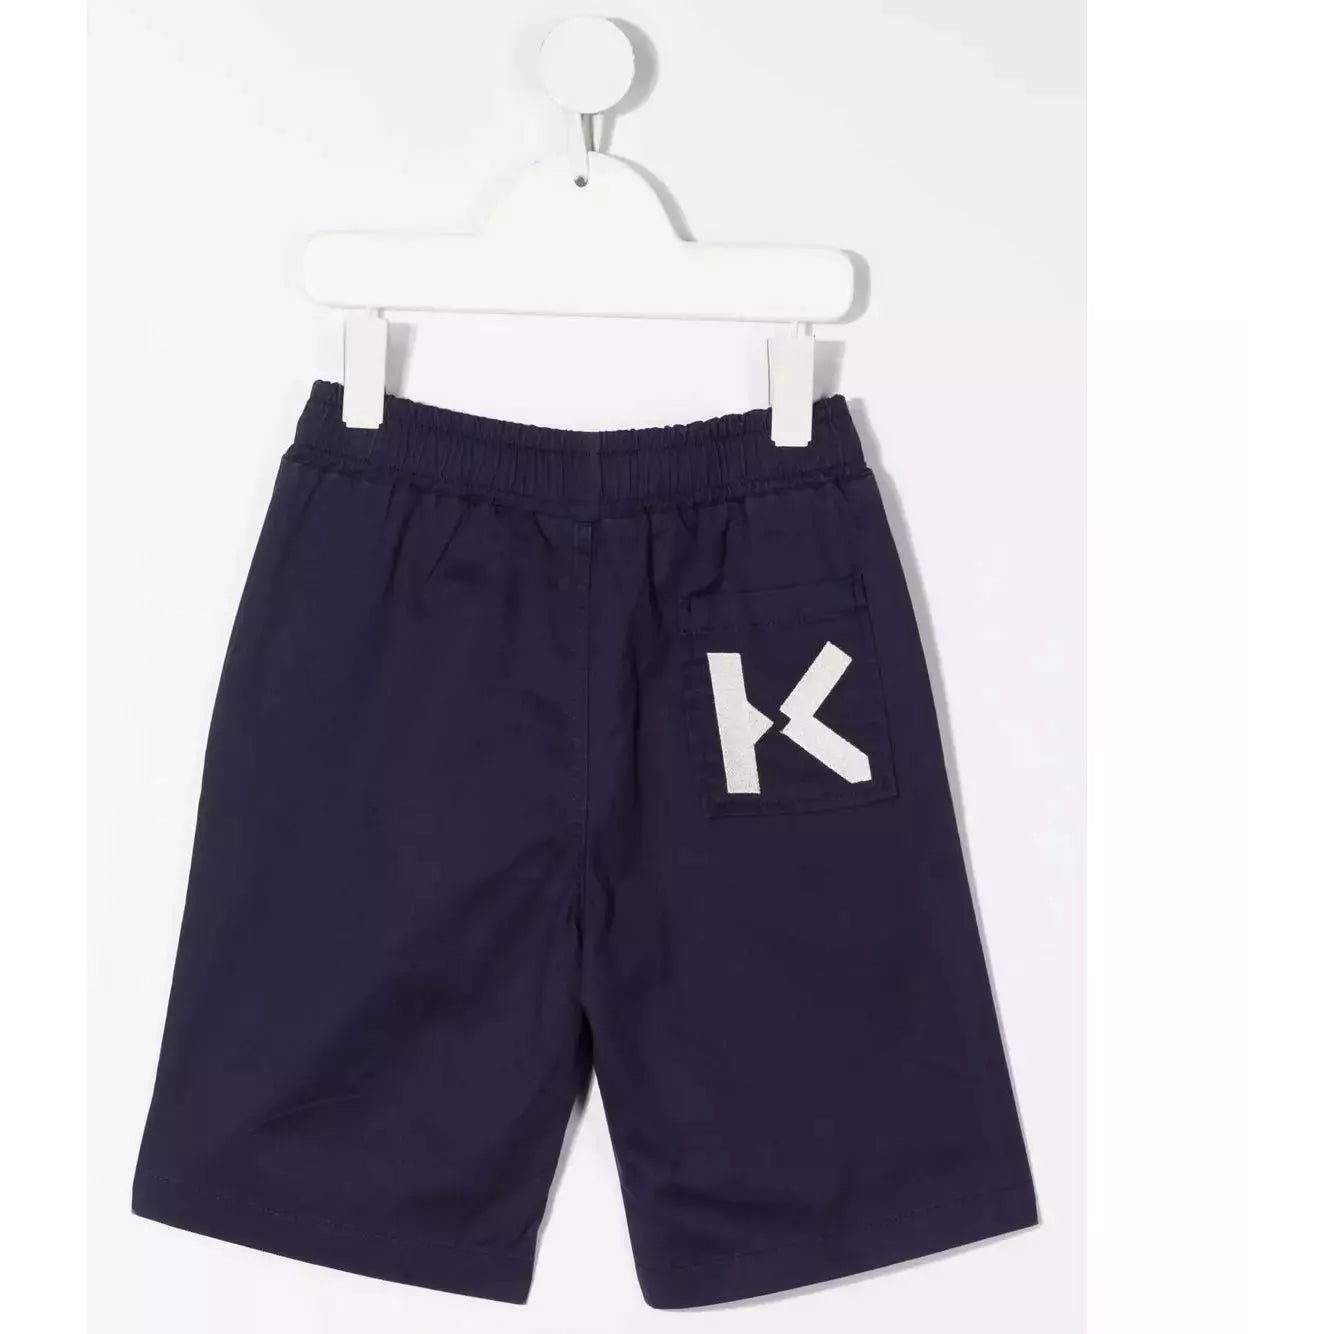 LOGO EMBROIDERED SHORTS